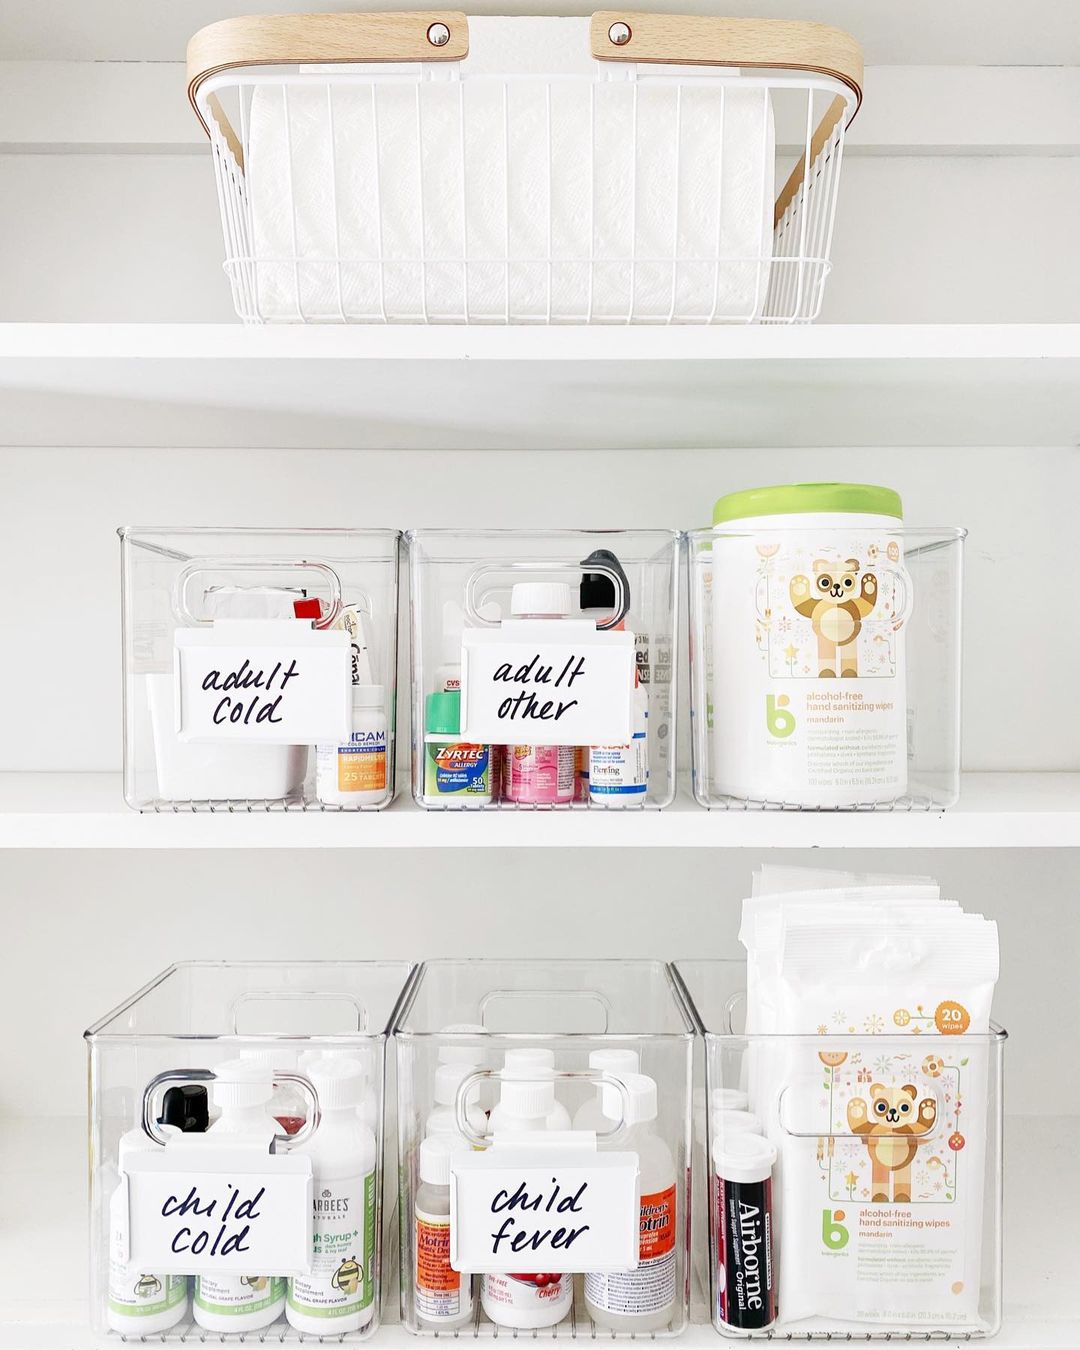 Medicine cabinet that's organized using clear plastic bins. Photo by Instagram user @breathing.room.organization